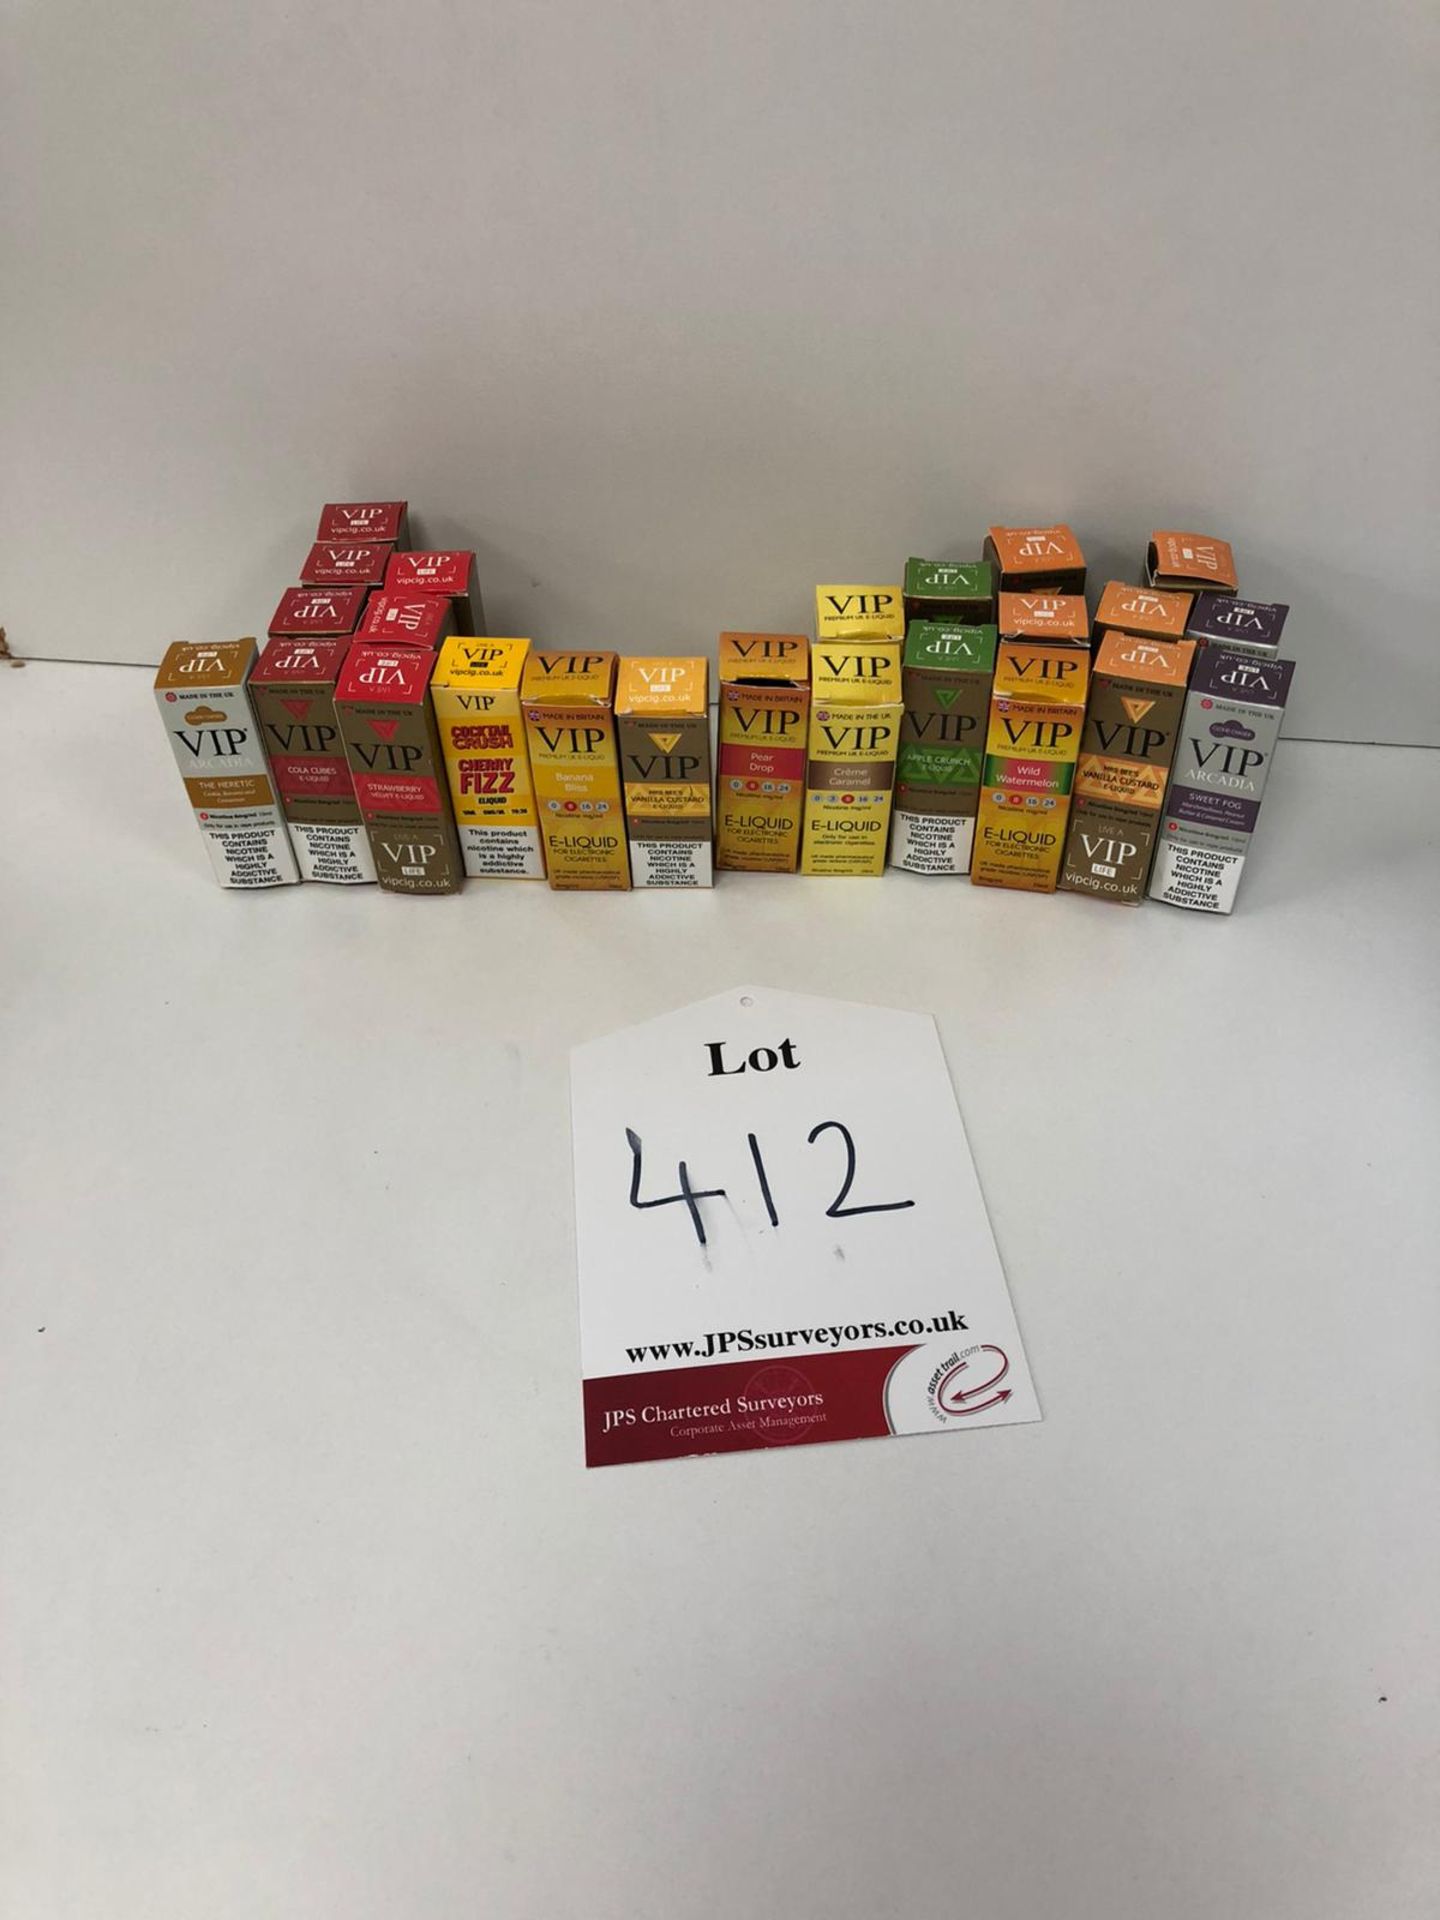 24 x VIP past or short best before date liquids as listed